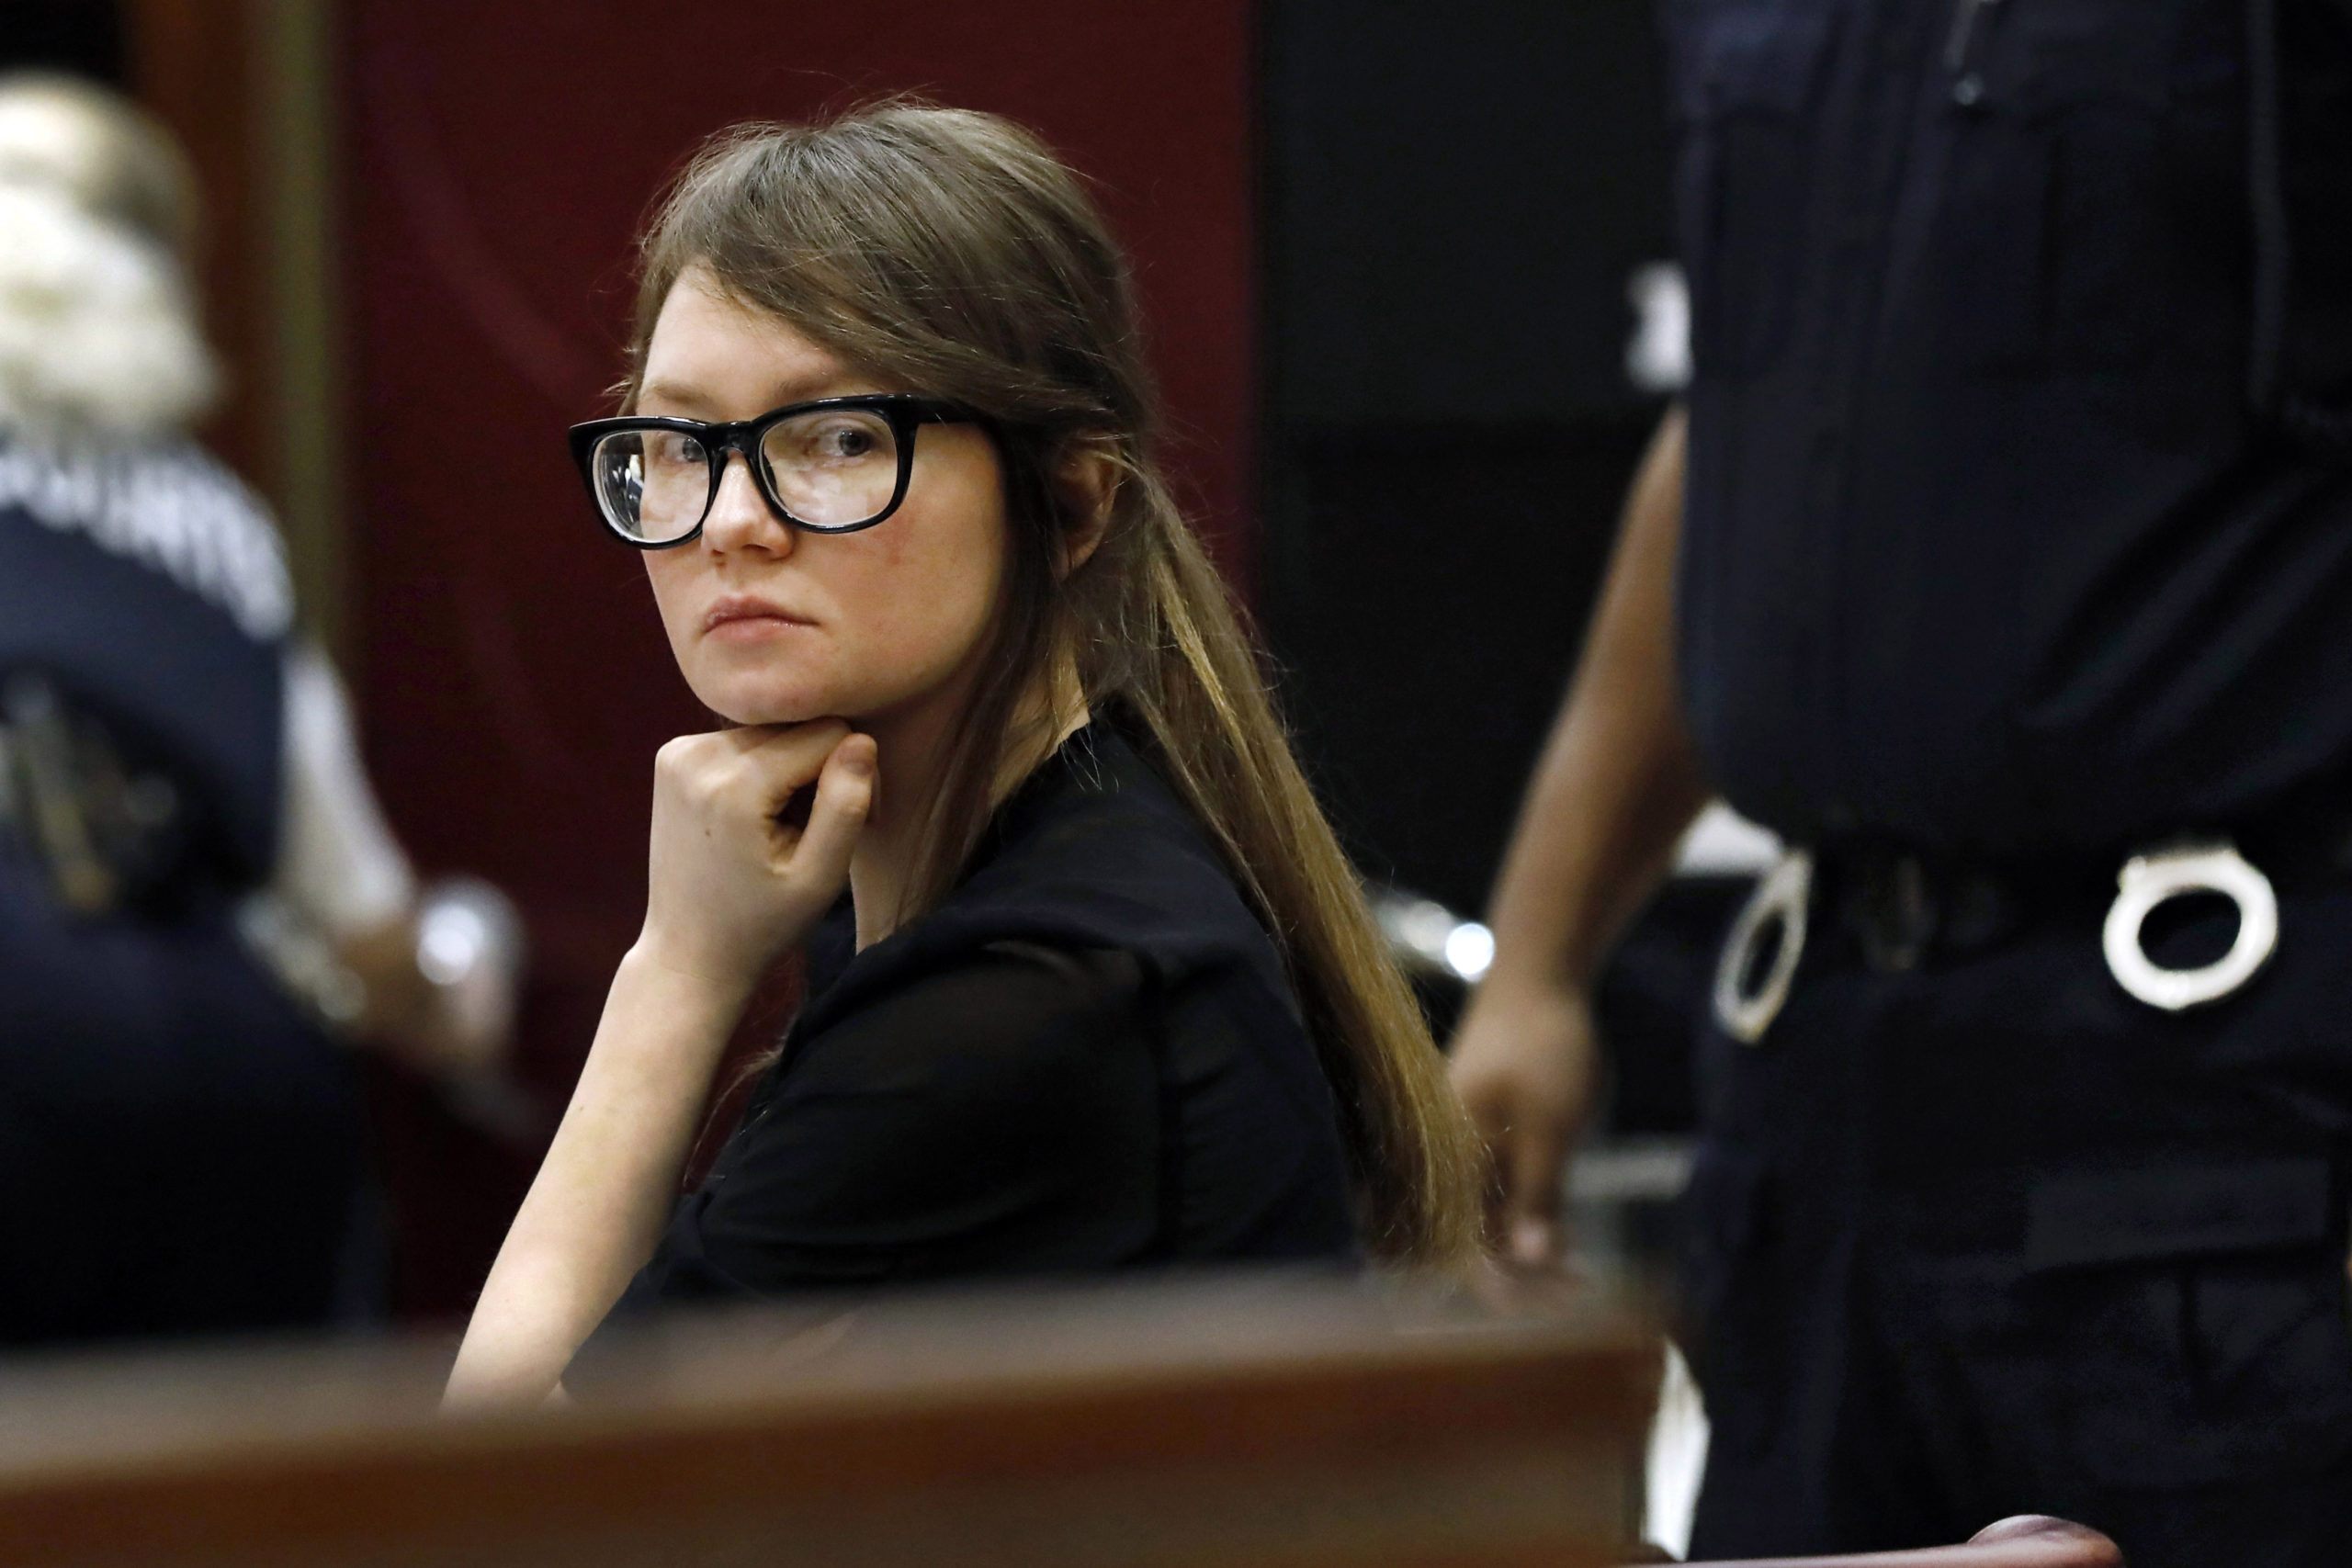 Anna Sorokin sits at the defense table during jury deliberations in her trial in New York State Supreme Court on April 25, 2019, in New York City. Sorokin's exploits inspired a Netflix series.